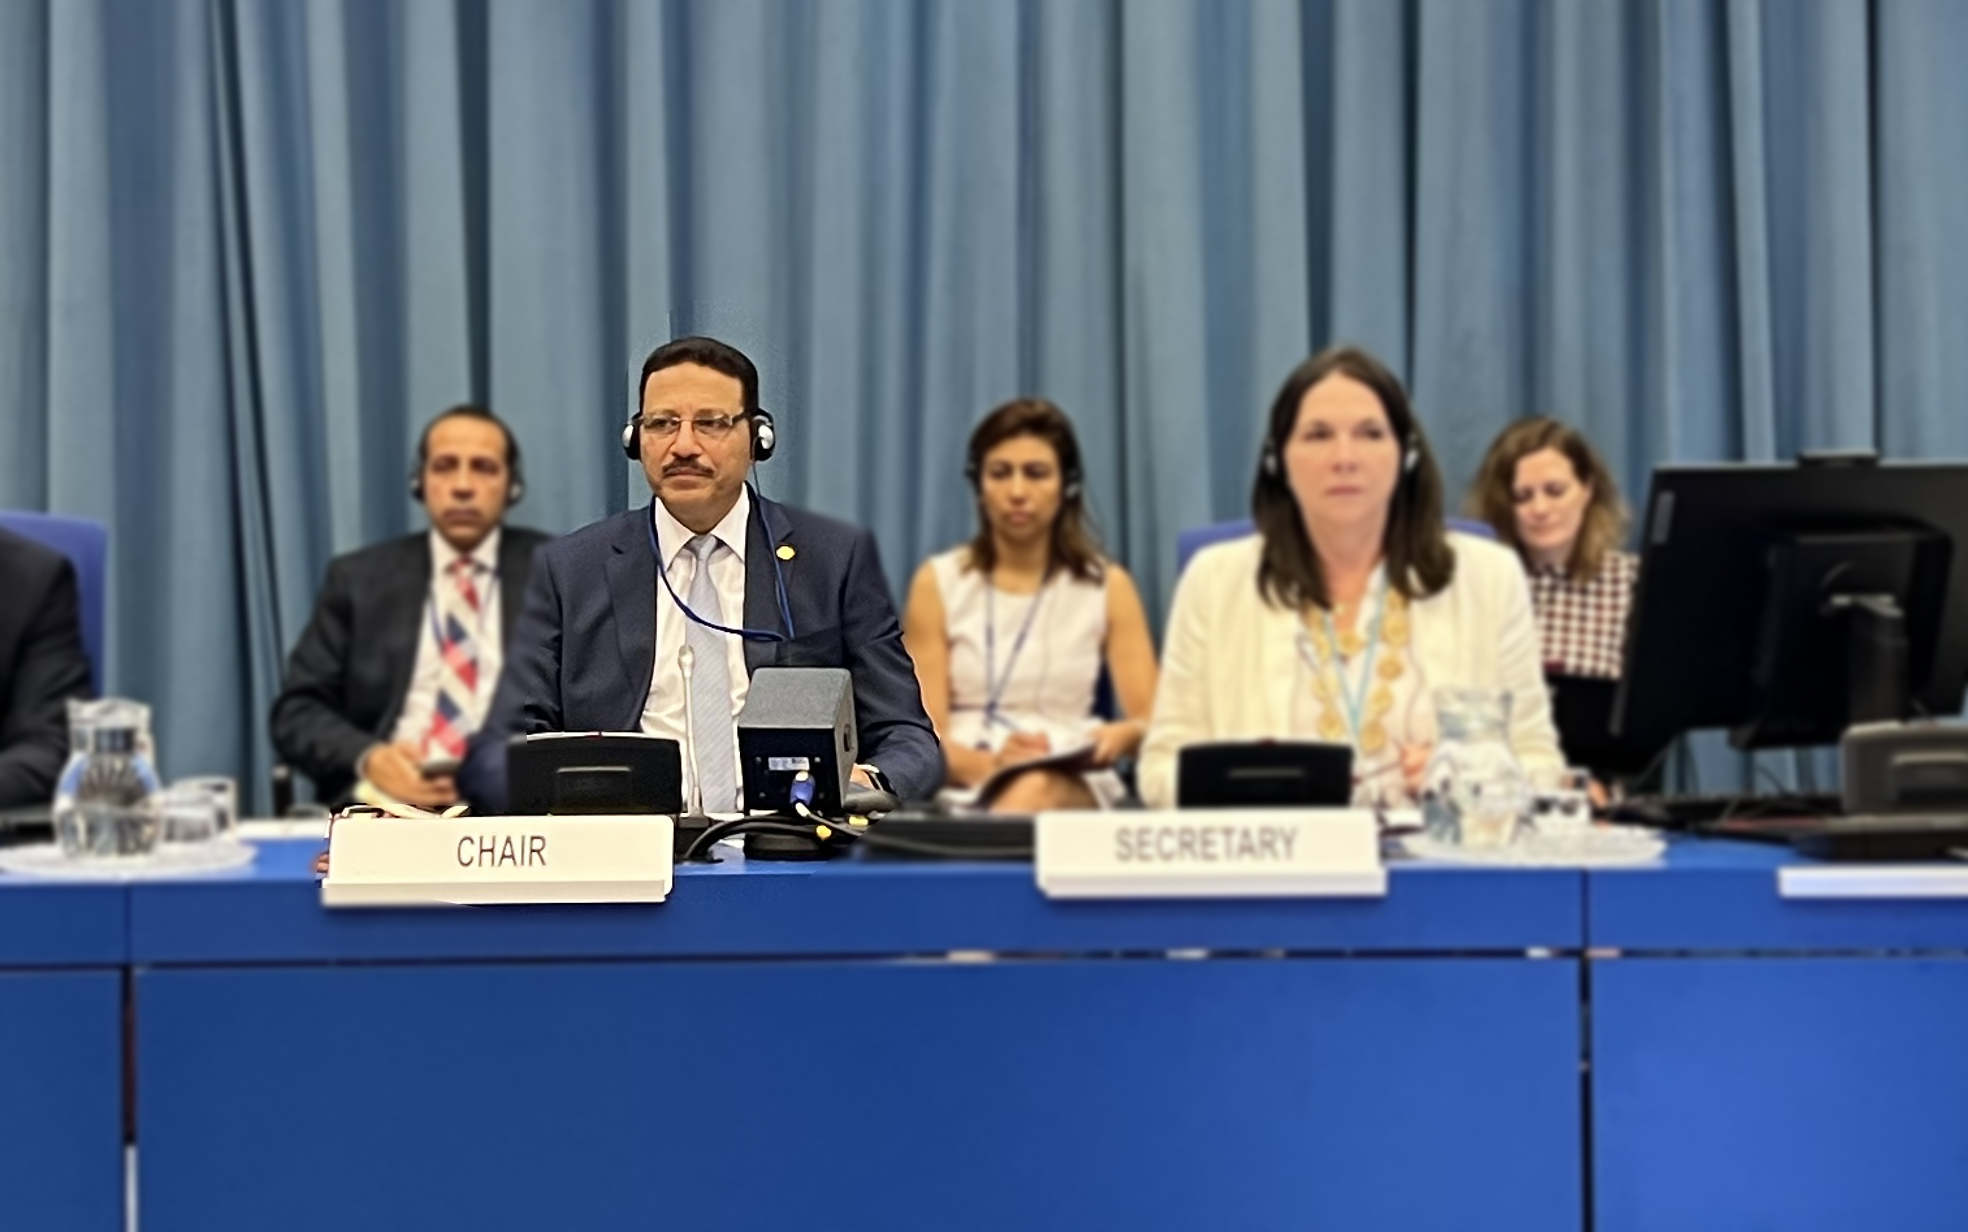  Minister Hassan AbdelShafi Ahmed chairs third day meetings of the UNCAC’s Working Groups in Vienna